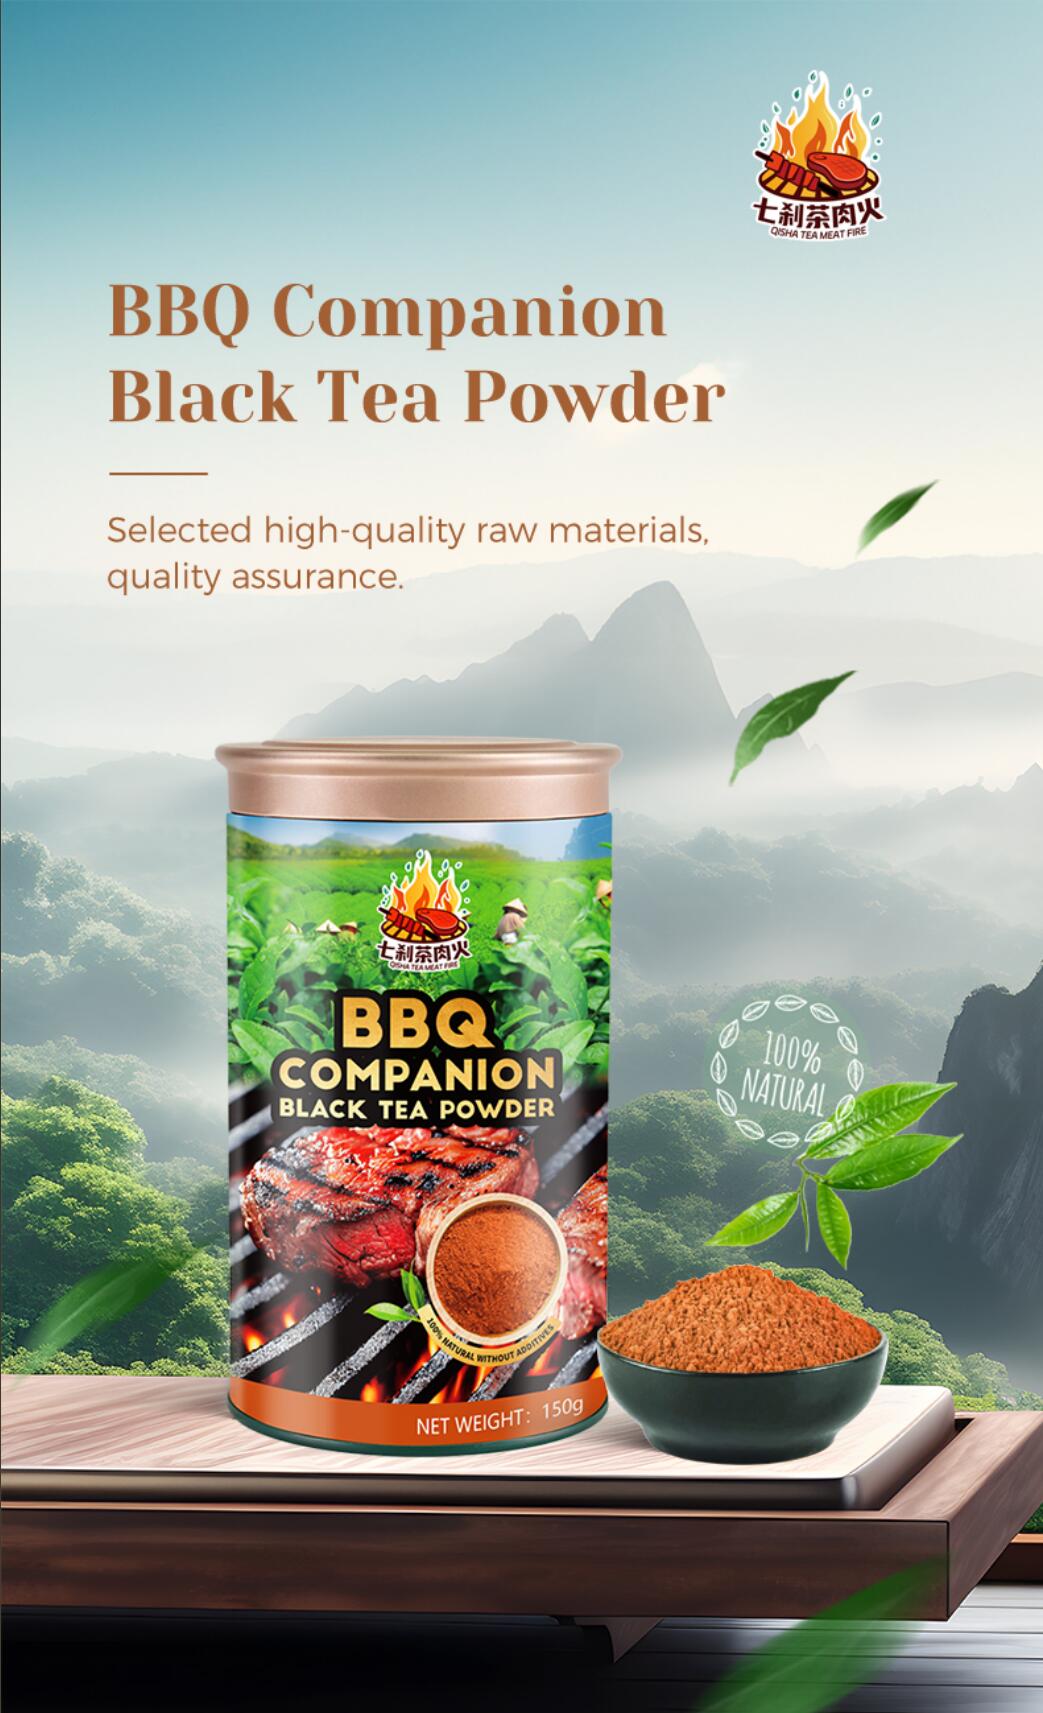 Mysterious barbecue sauce made with Chinese tea powder seasoning插图